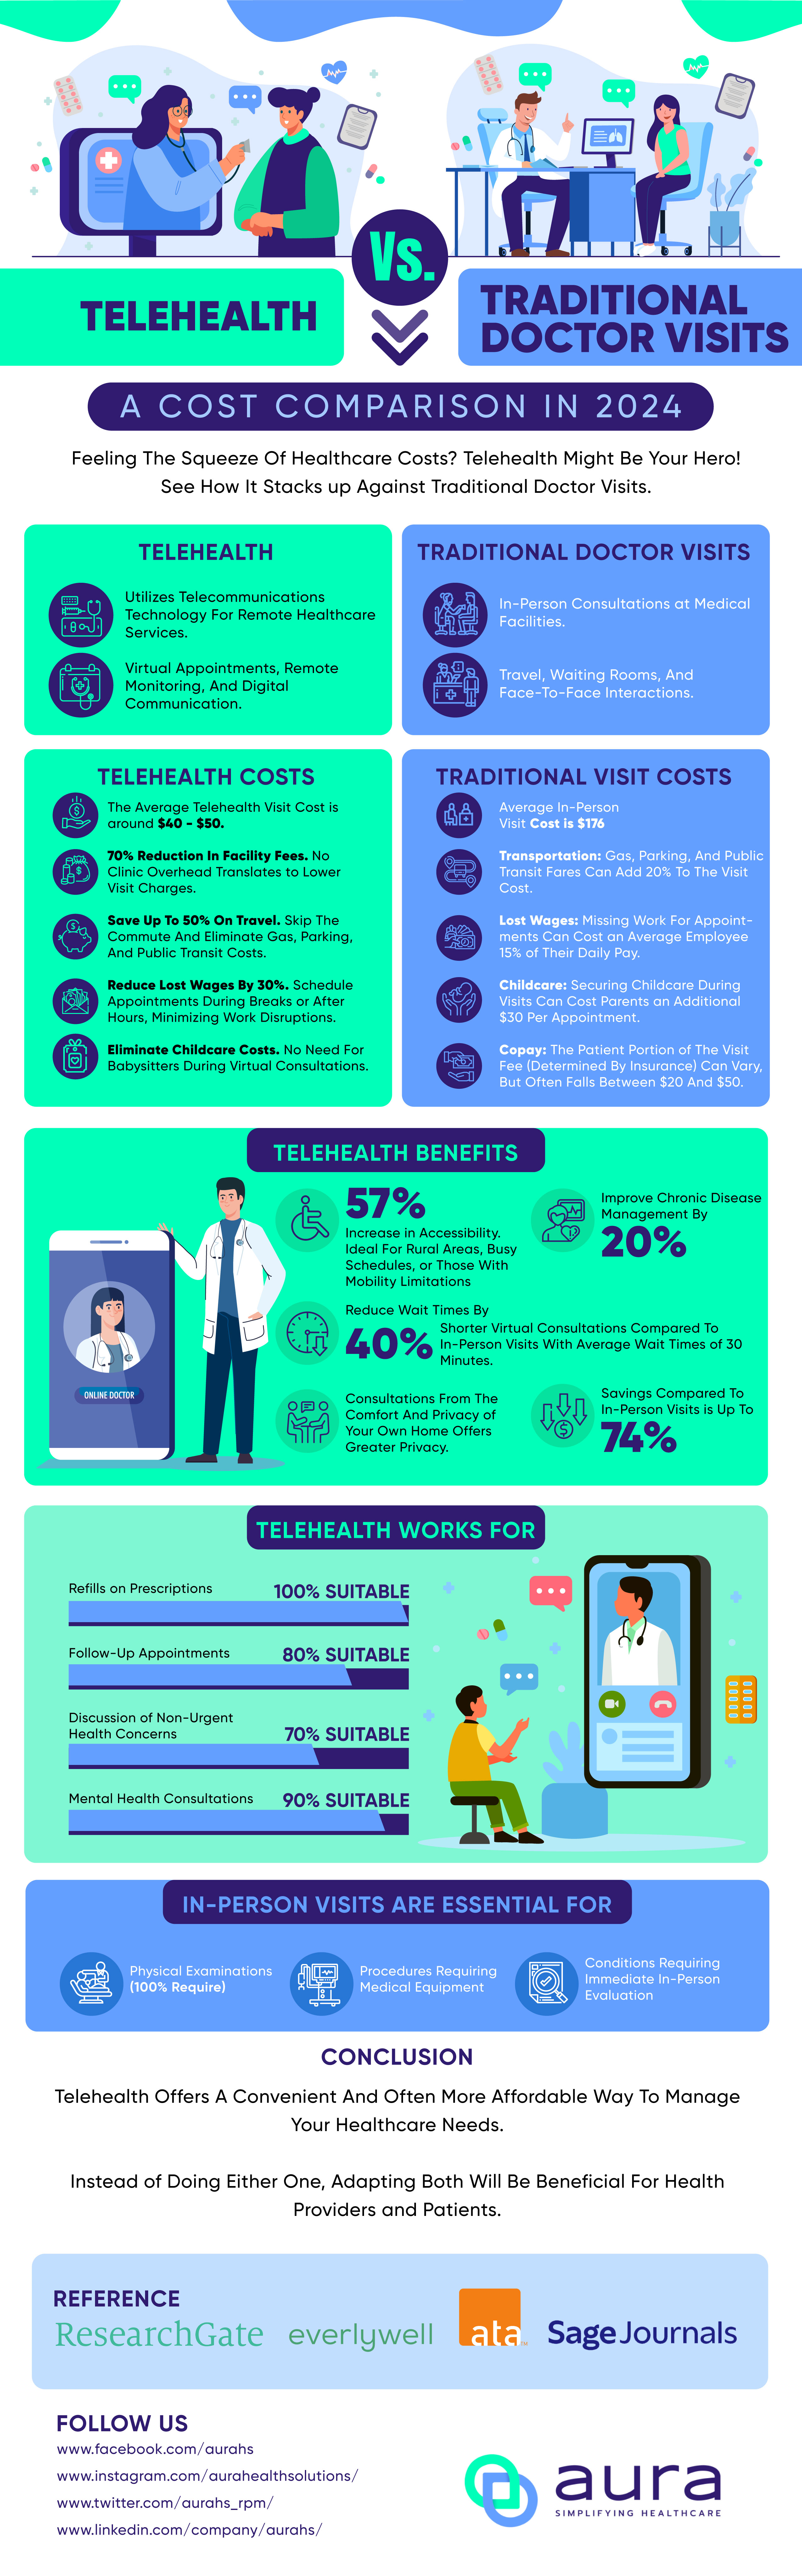 Telehealth Vs. Traditional Doctor Visits